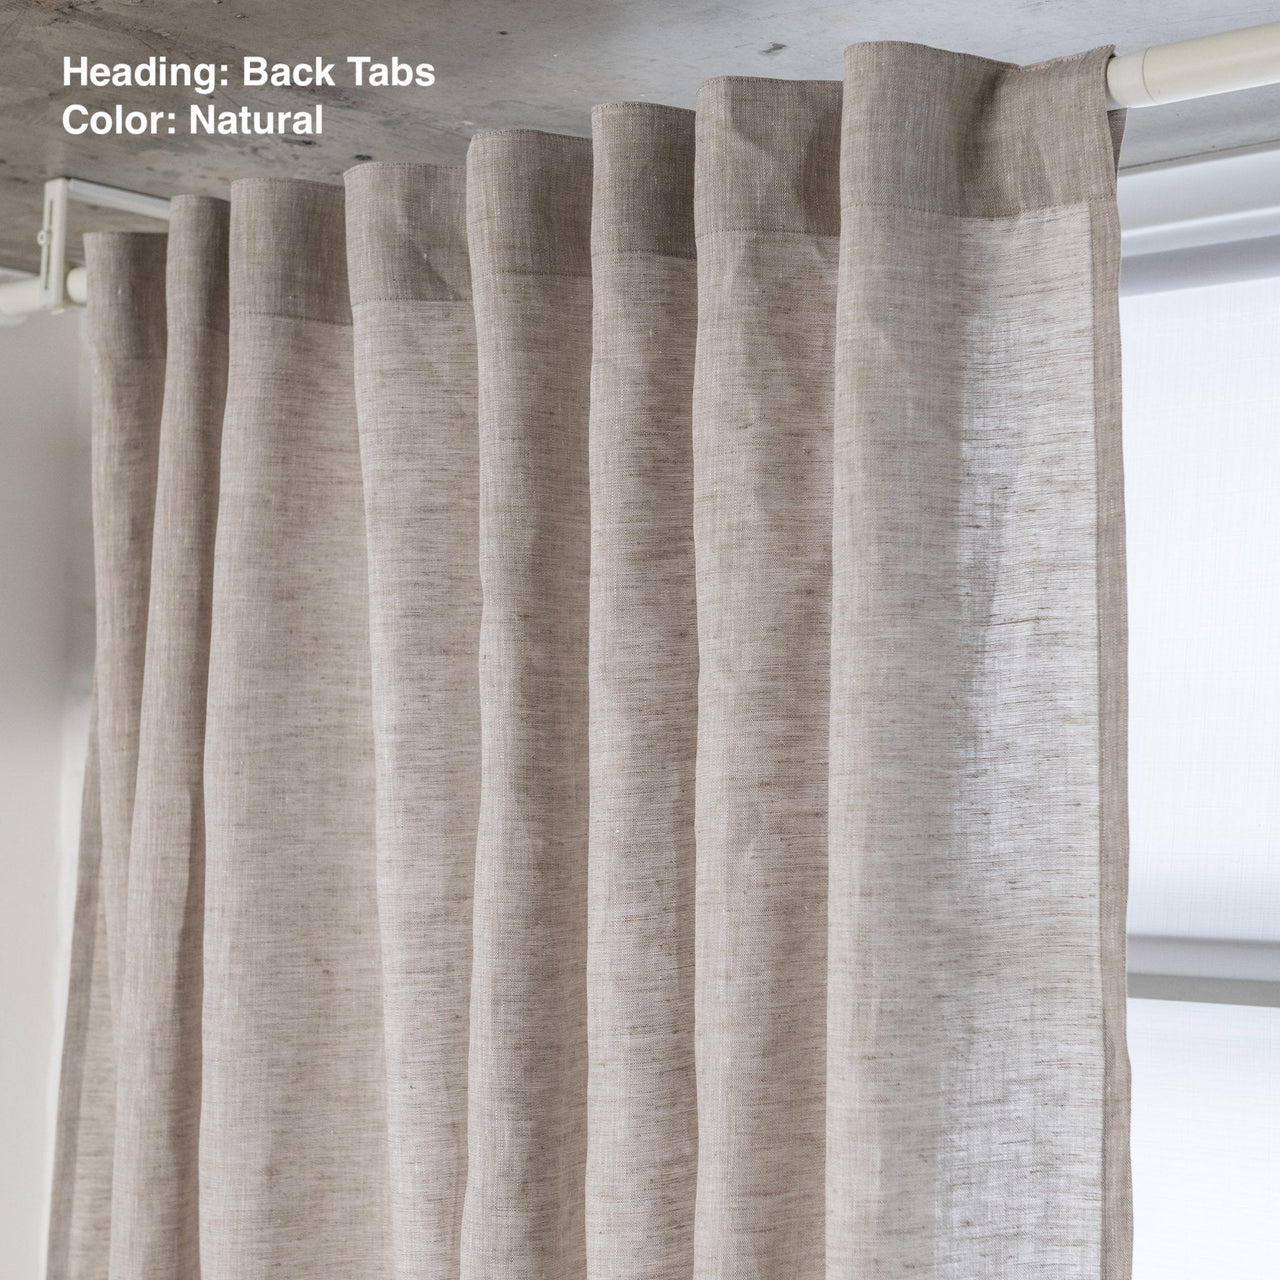 @Heading: Back Tabs Curtains in Natural Color